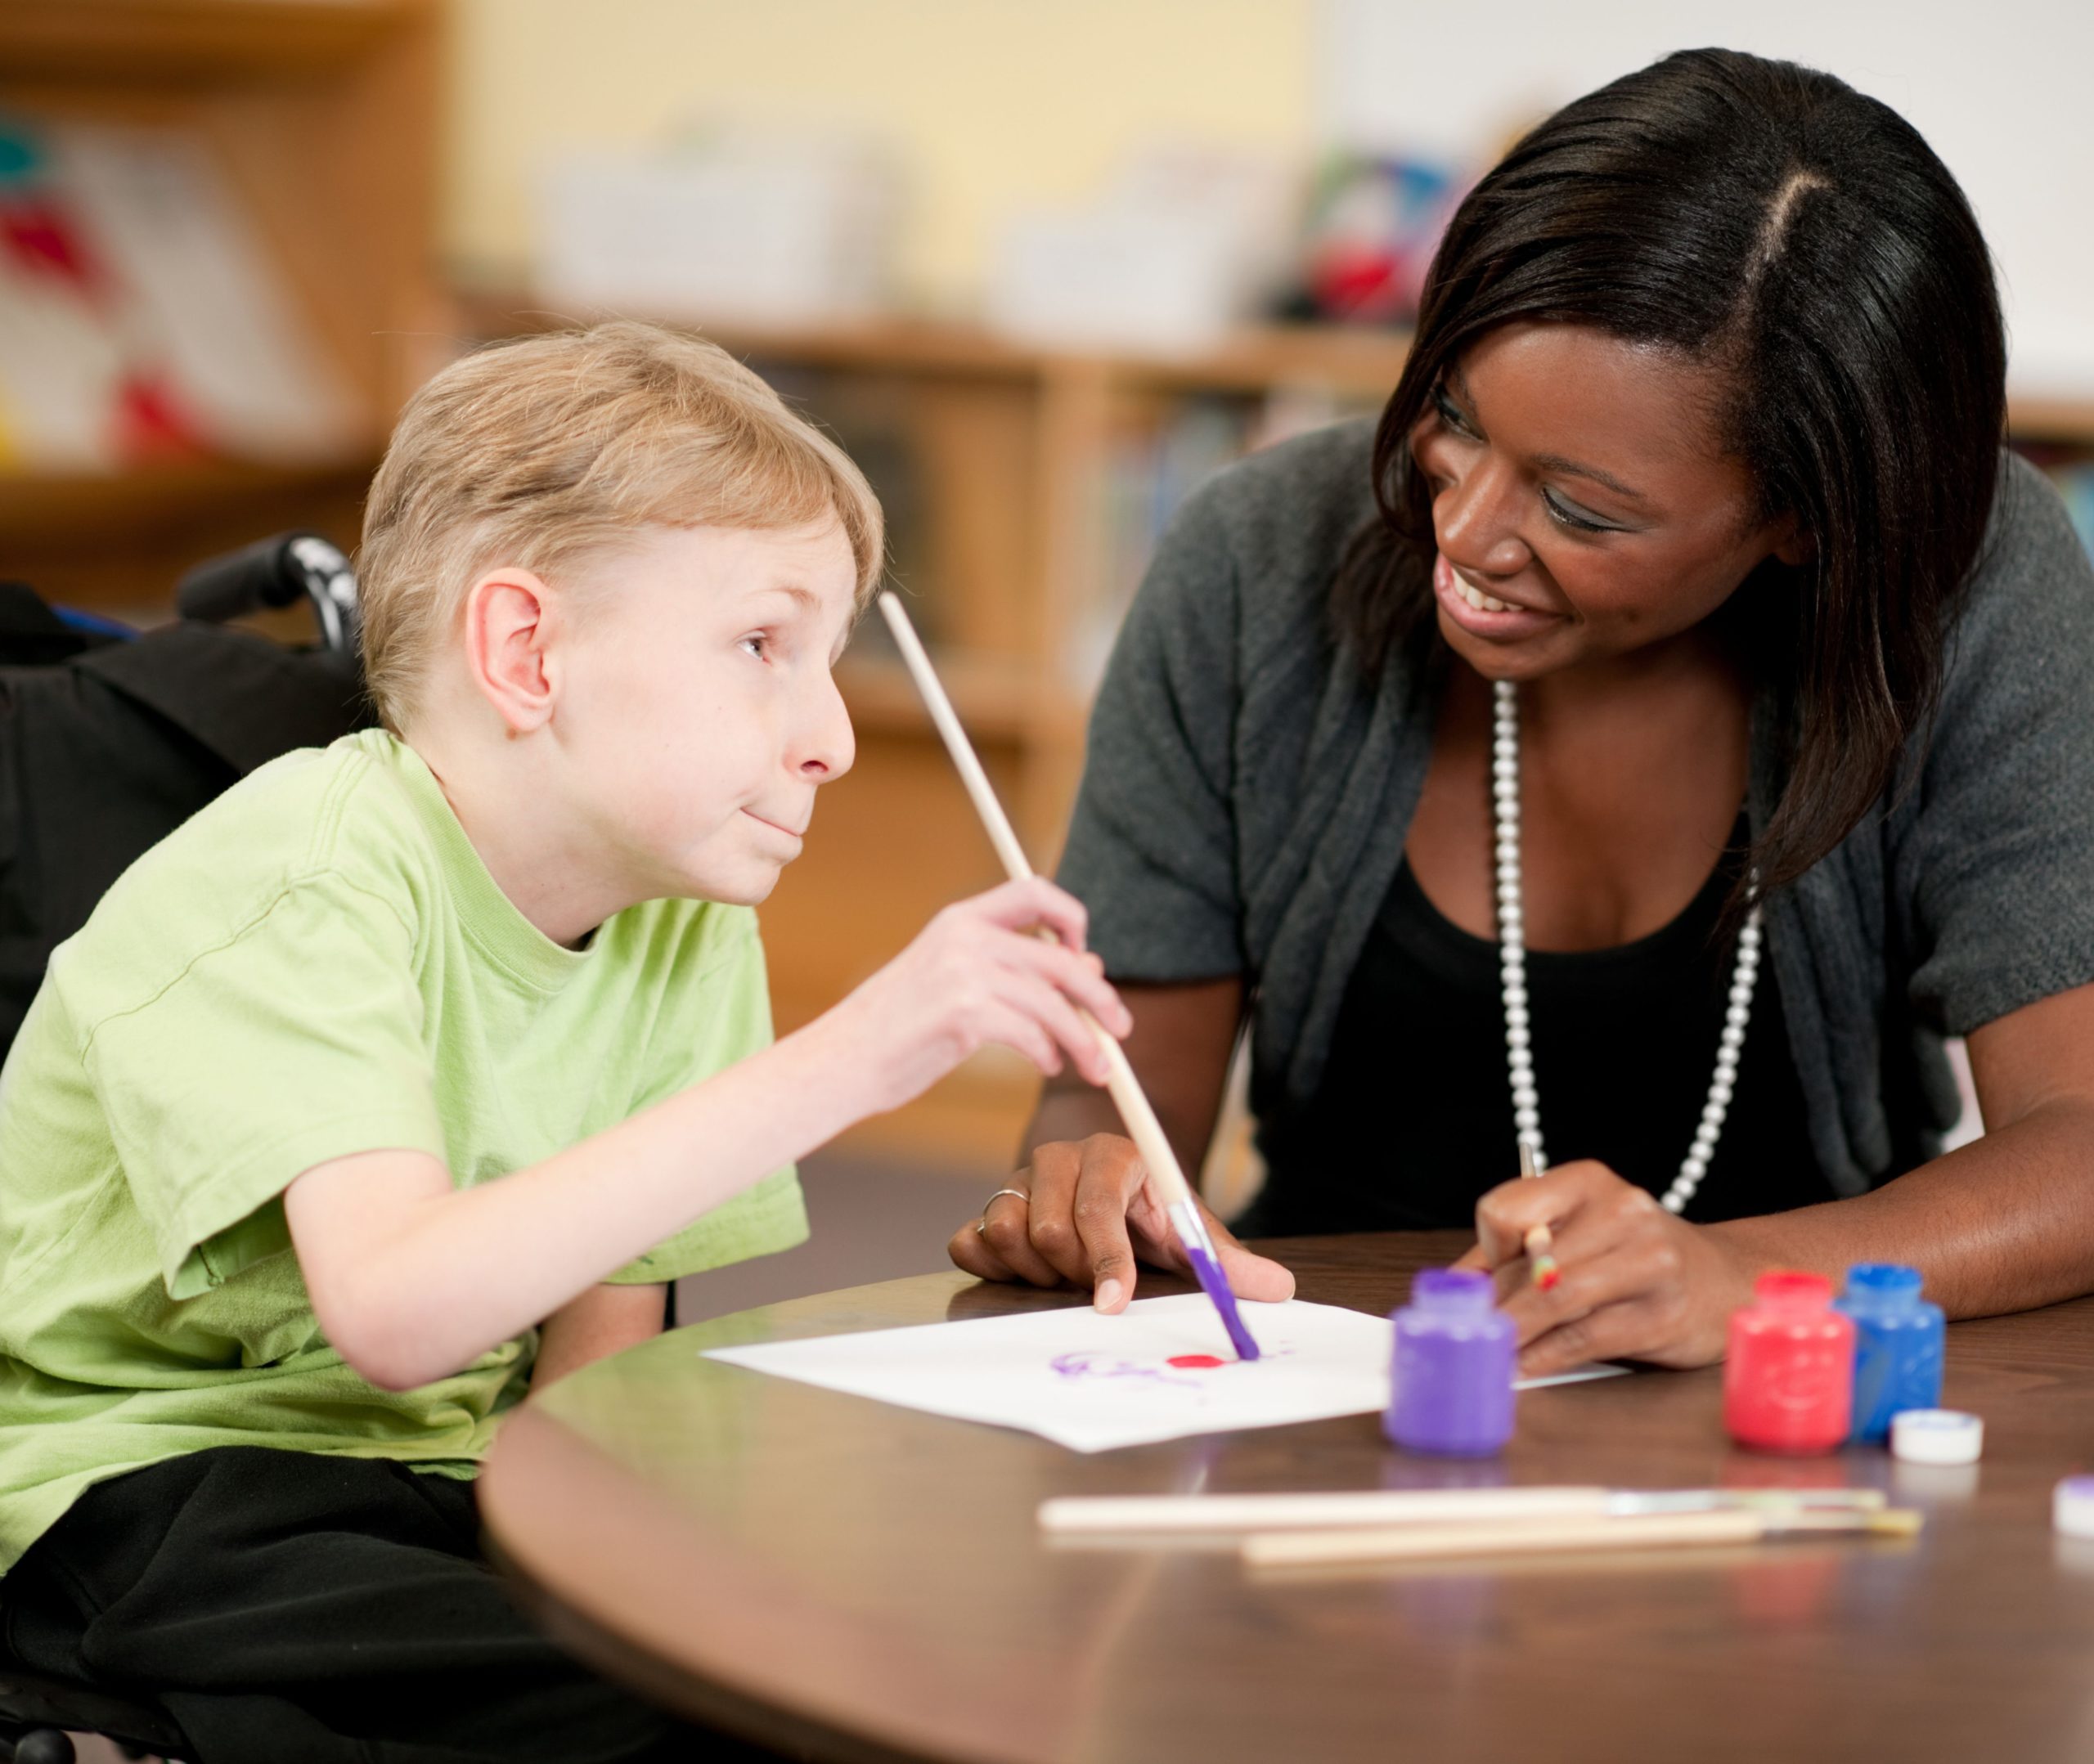 What Qualifications Do I Need to Work With Special Needs